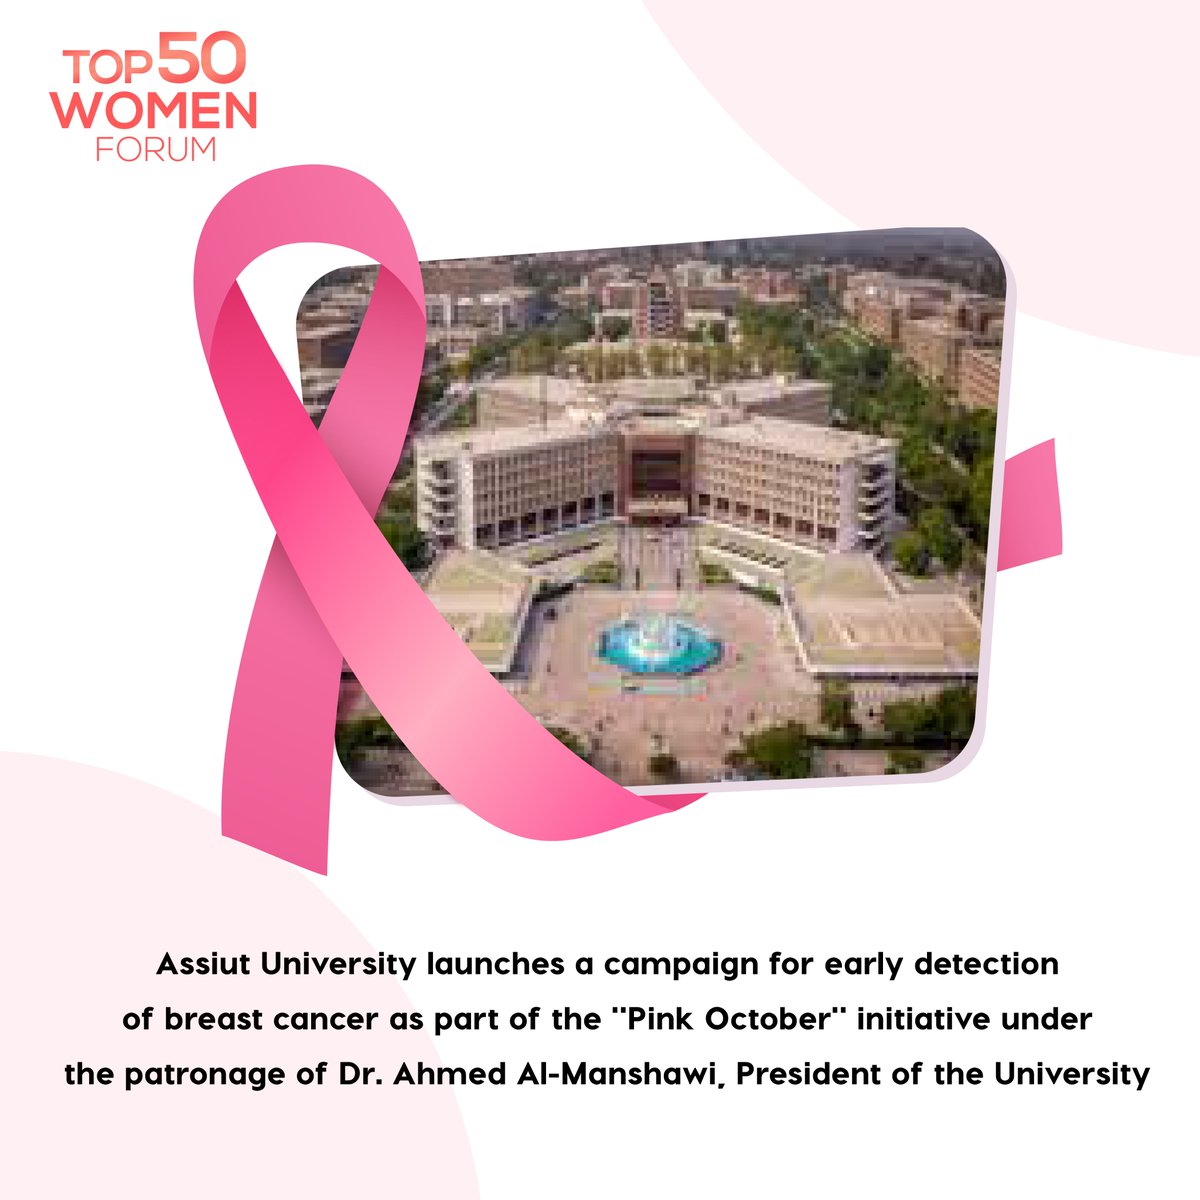 October is #breastcancerawarenessmonth a time to unite to #endbreastcancer
#pinkoctober a symbol of hope & solidarity, reminds us of the strength of the importance of early detection

This is how #breastcancerawareness is going this month!

#Top50WomenForum #cancerawareness